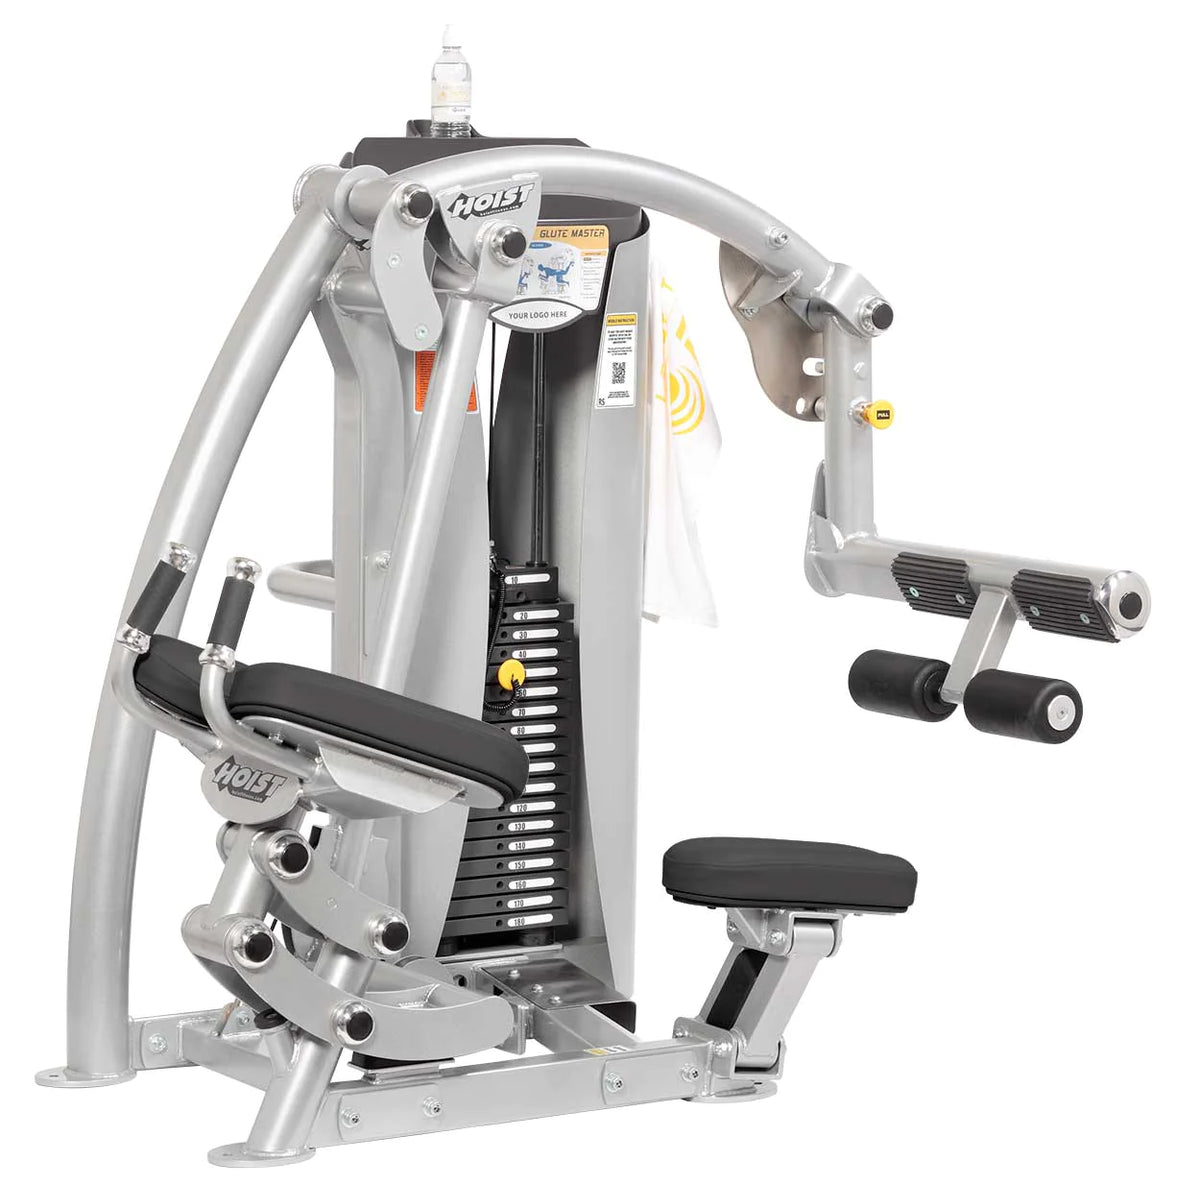 Hoist Fitness RS-1412 Glute Master full view | Fitness Experience